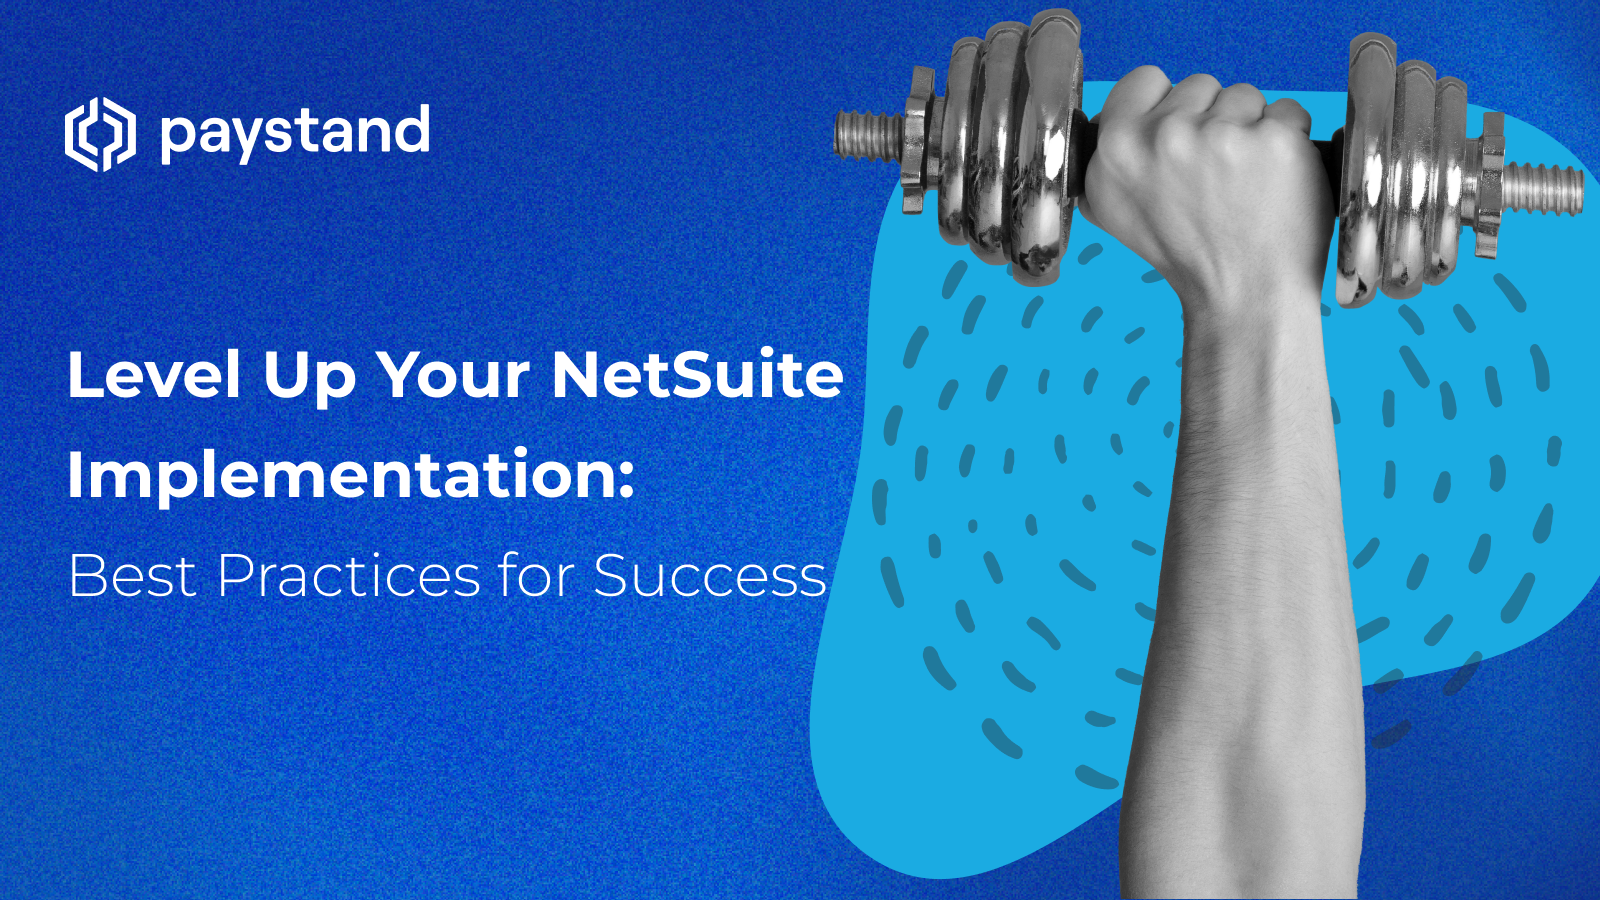 Level Up Your NetSuite Implementation: Best Practices for Success